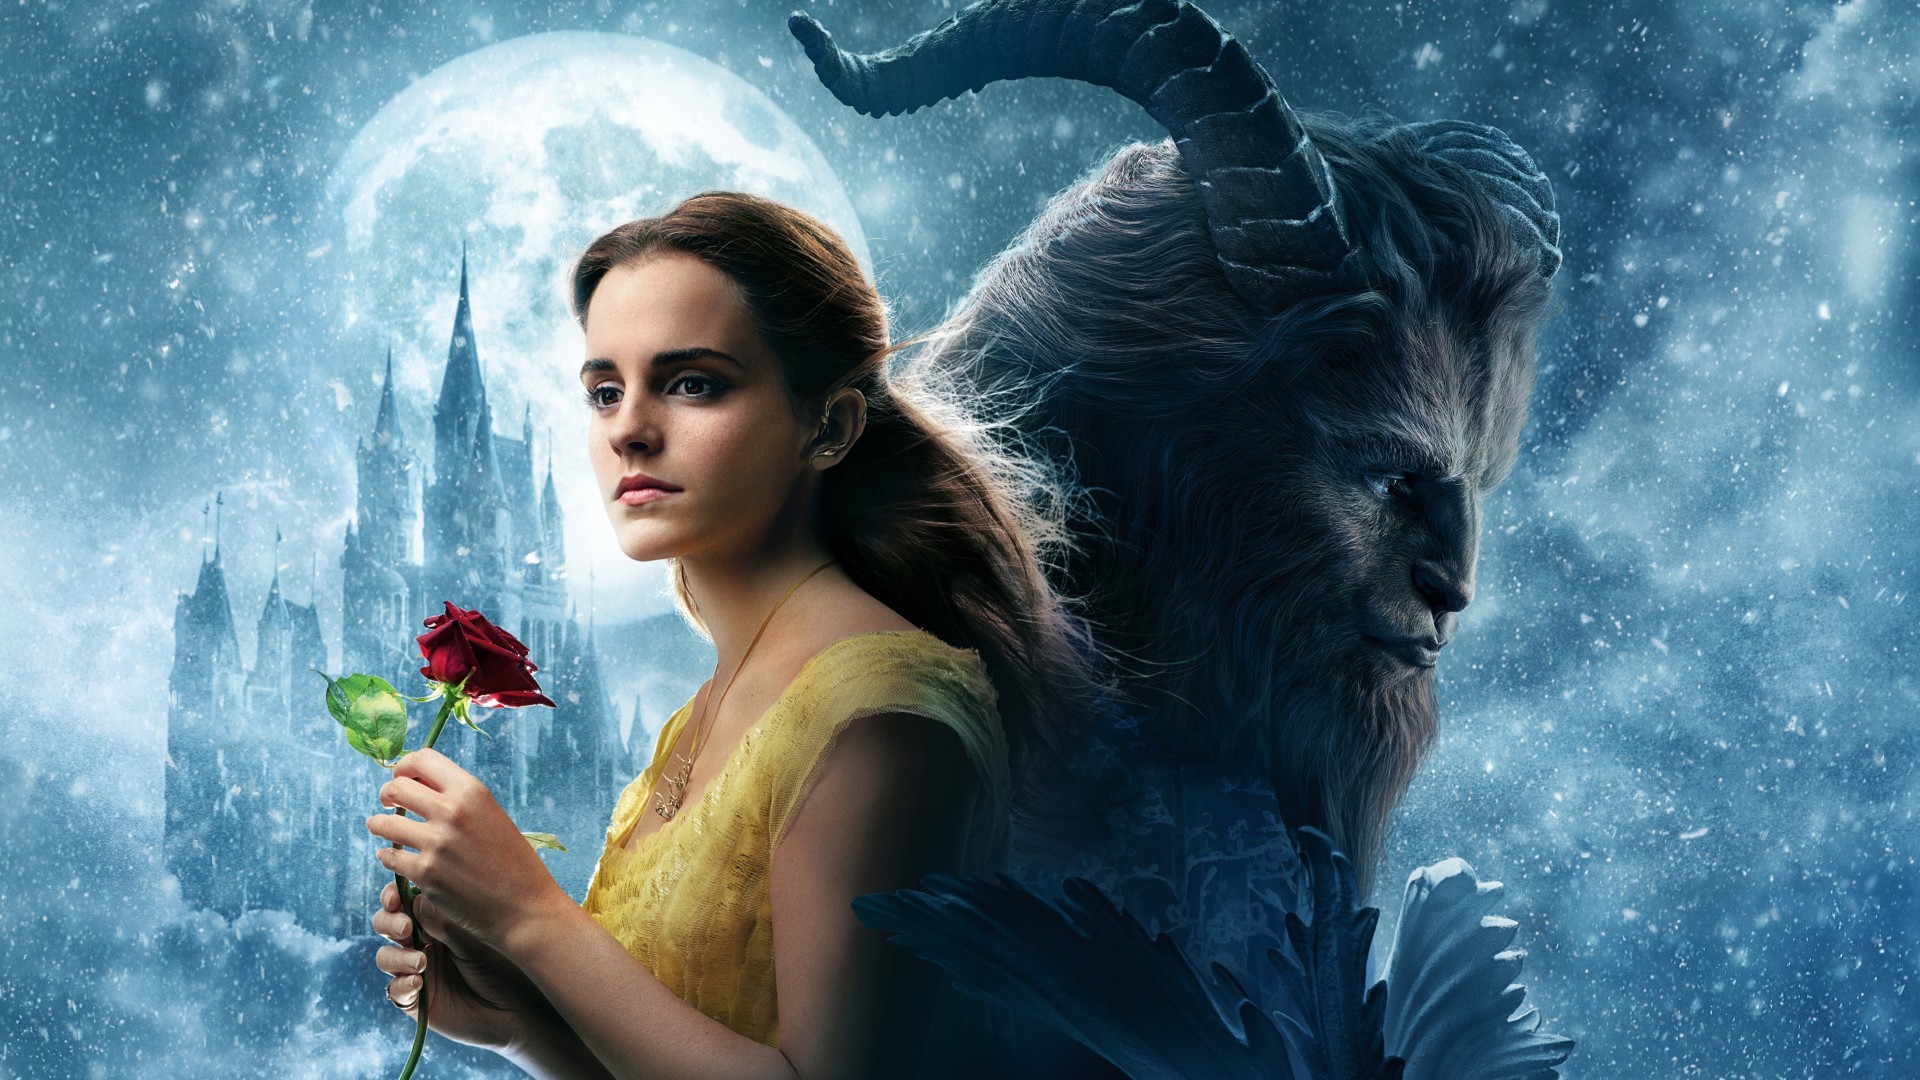 Emma Watson Beauty and the Beast for Wallpaper Size 1920Ã1080